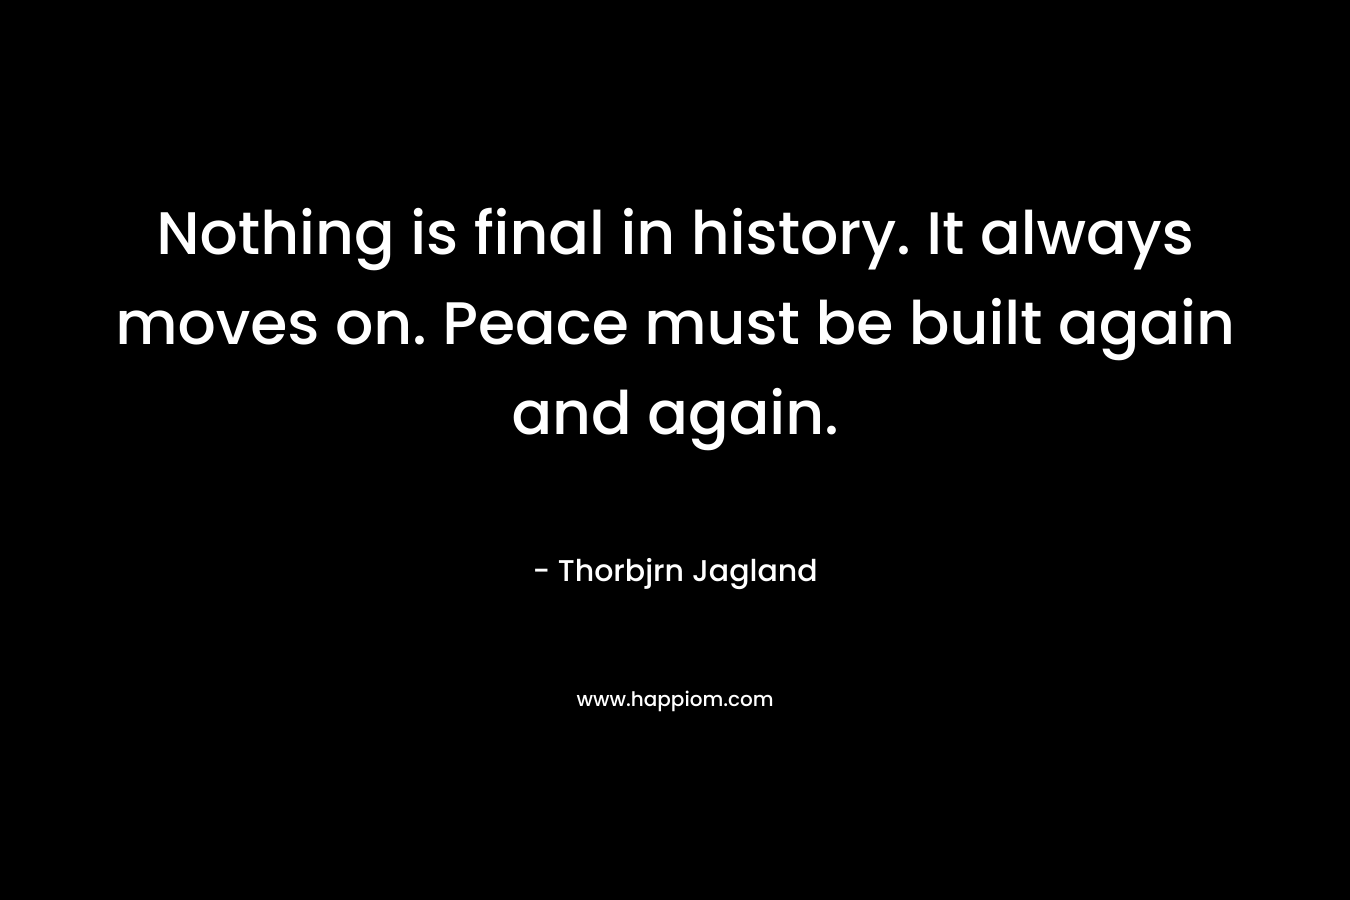 Nothing is final in history. It always moves on. Peace must be built again and again.